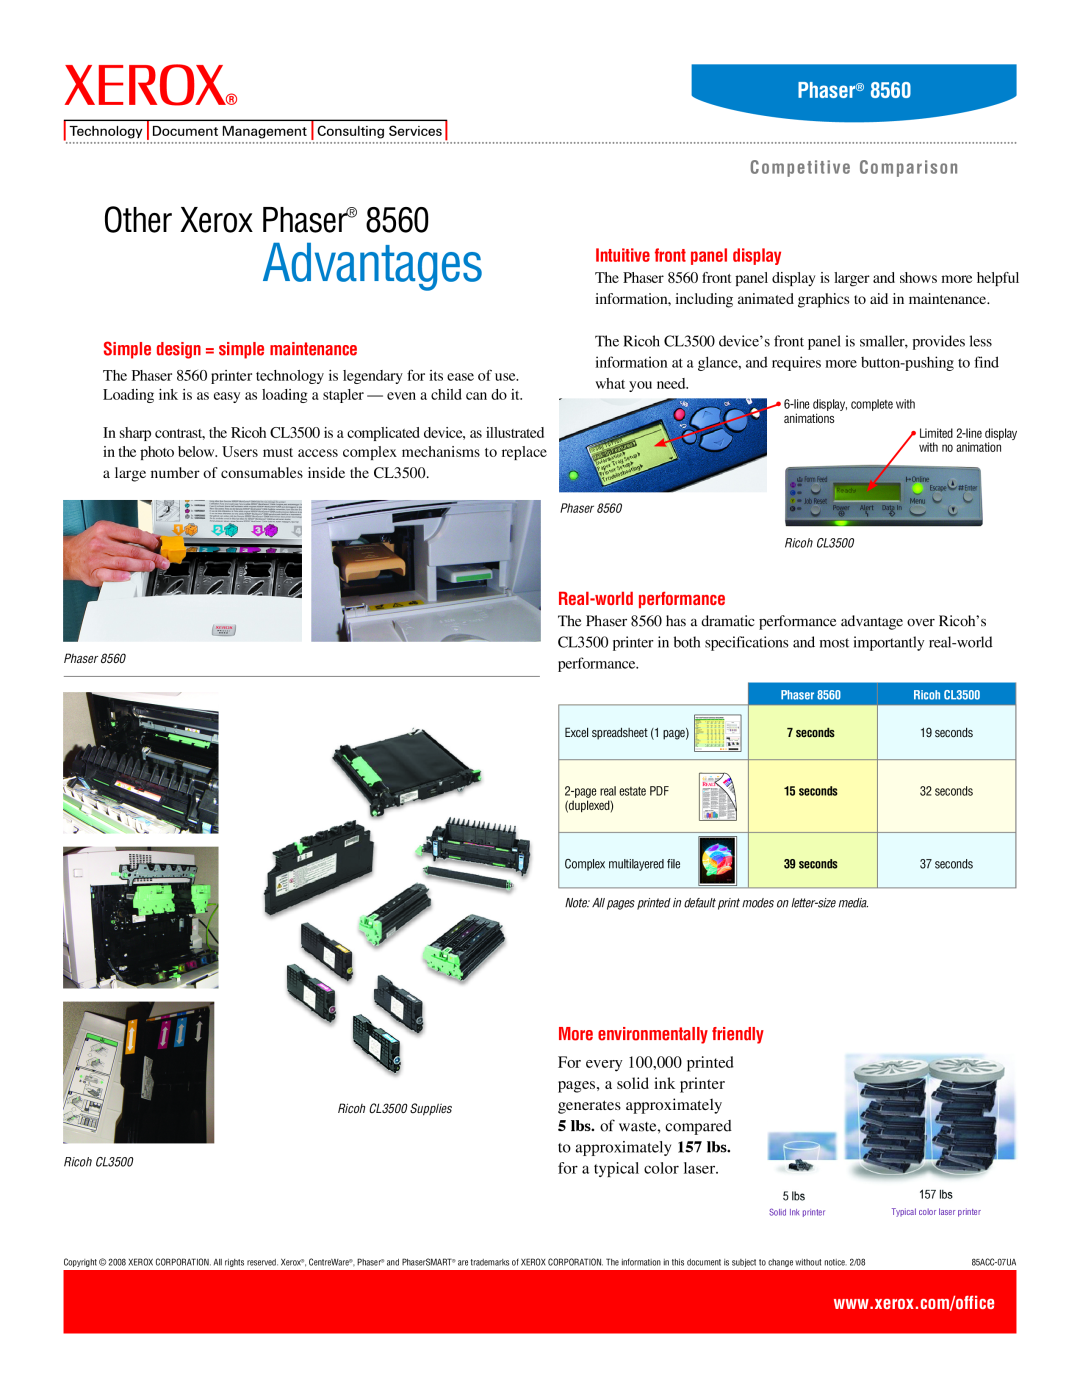 Xerox 8560 manual Advantages, Other Xerox Phaser, Competitive Comparison, Simple design = simple maintenance 